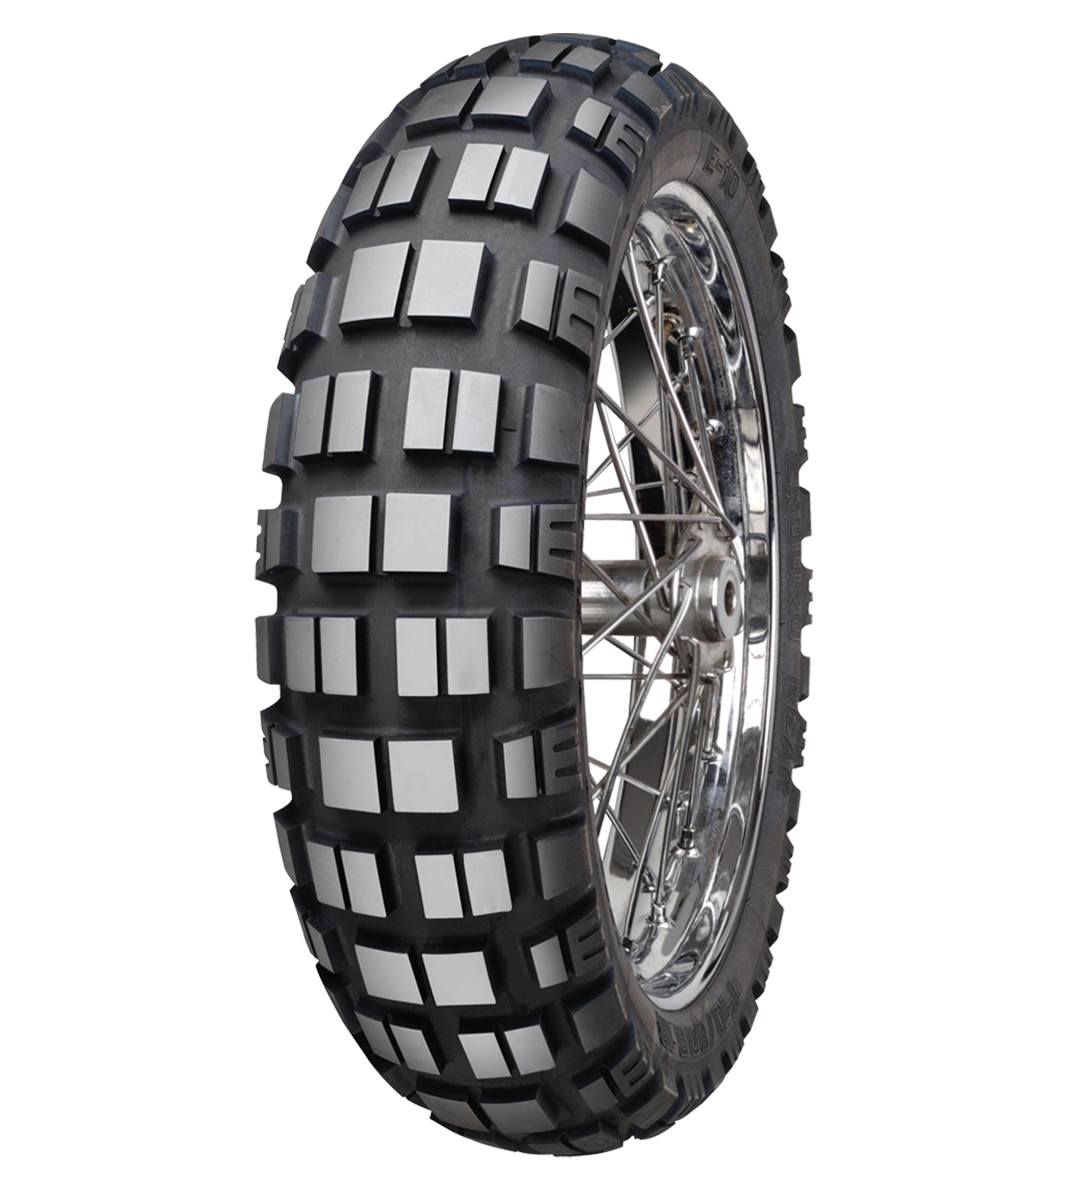 Mitas E-10 ENDURO 140/80B17 Trail OFF Trail 69T No Stripe Tubeless Rear Tire, 224160, 140/80B17, Adventure Touring, E Series, E-10 Enduro, Rear, Trail, Trail OFF, Tires - Imported and distributed in North &amp; South America by Lindeco Genuine Powersports - Premier Powersports Equipment and Accessories for Motorcycle Enthusiasts, Professional Riders and Dealers.